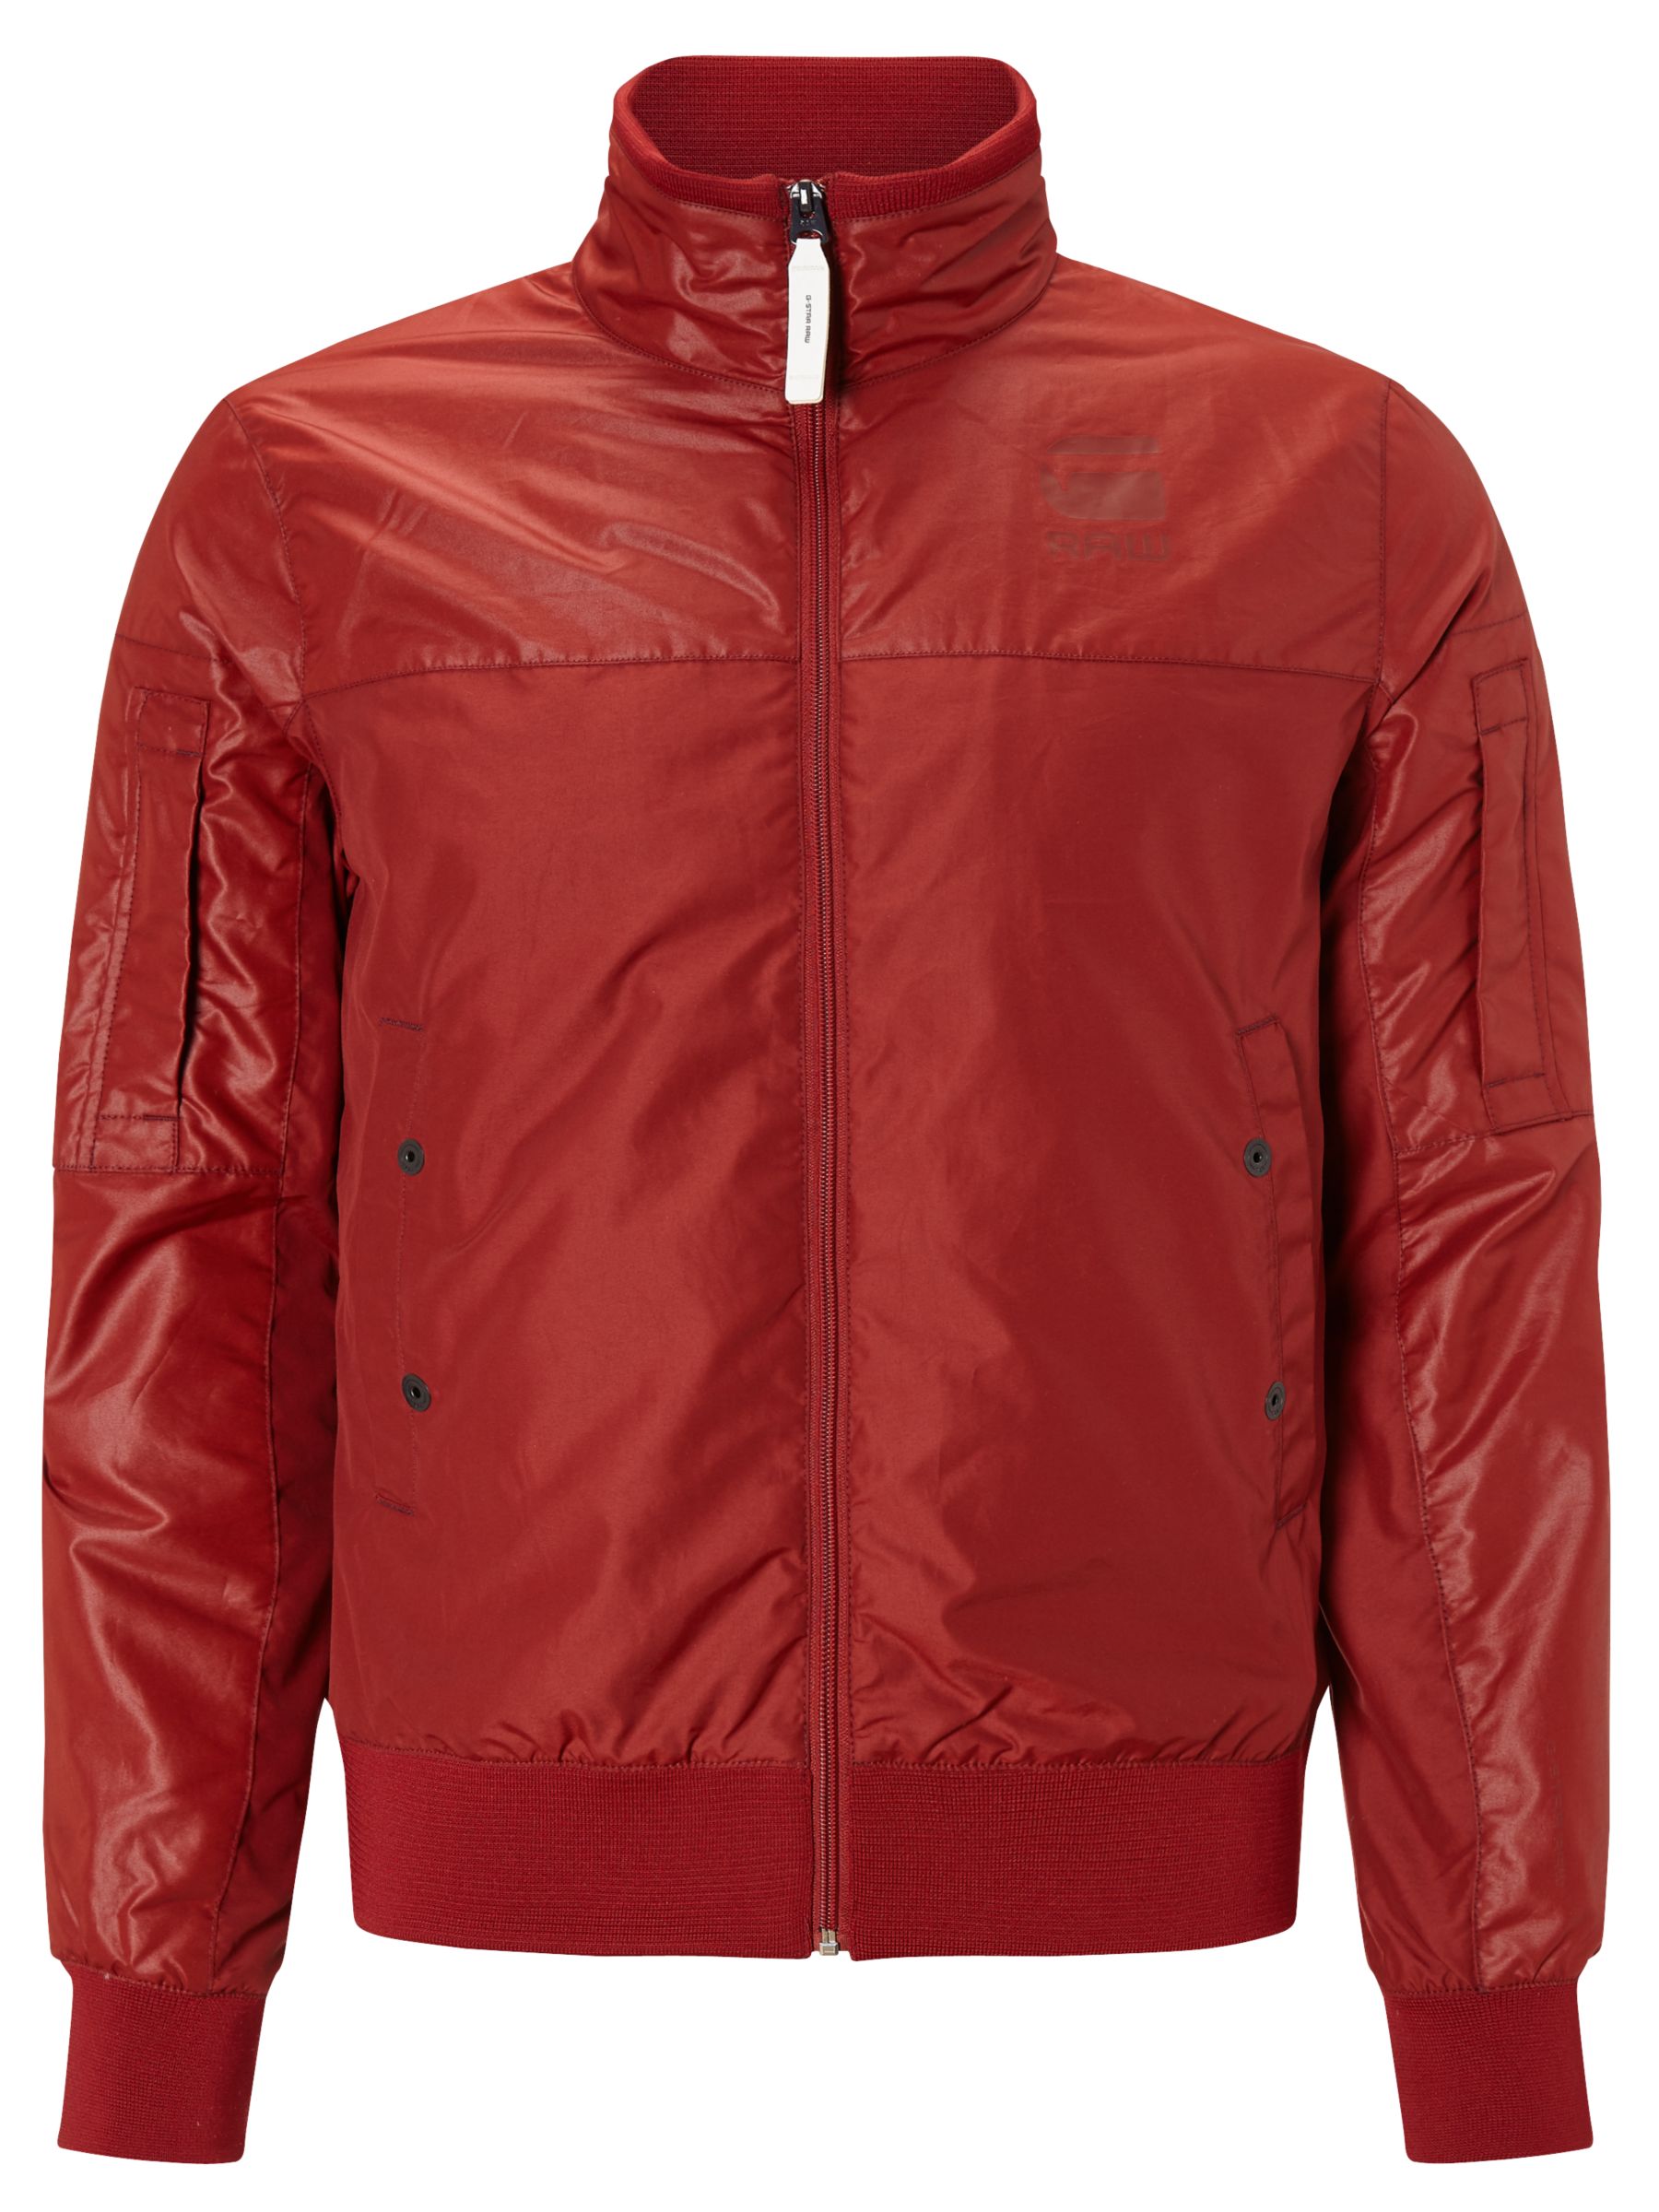 g star red jacket